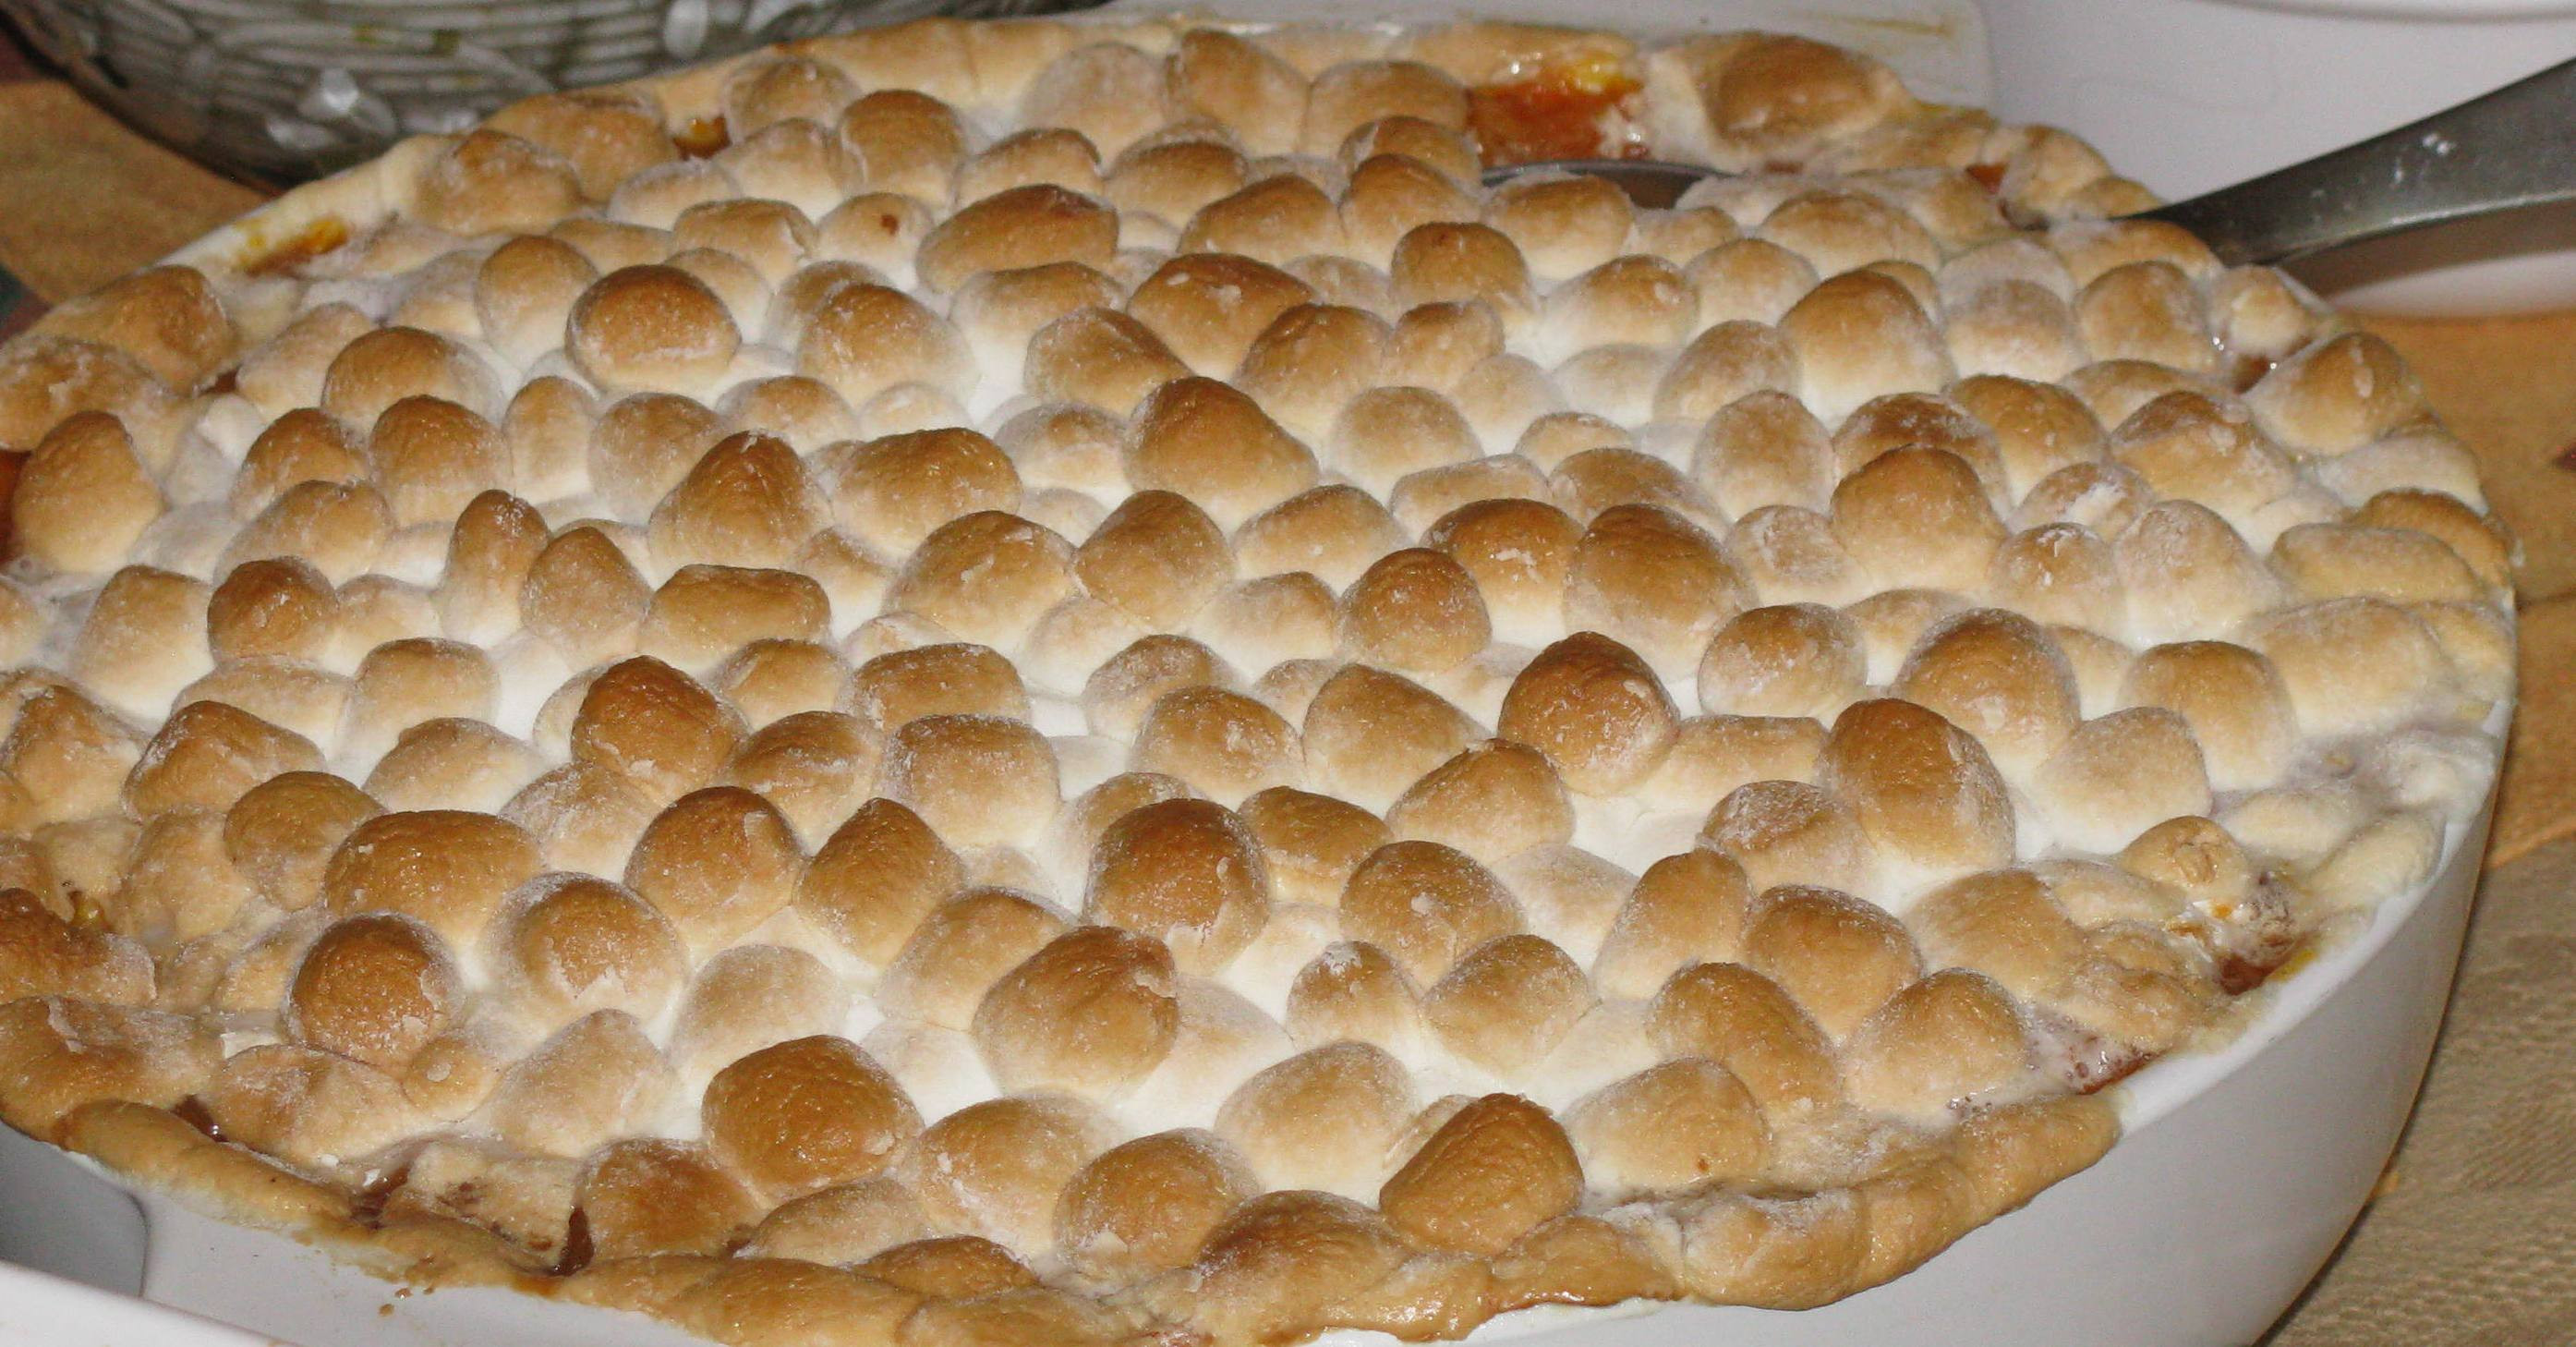 Thanksgiving Sweet Potatoes With Marshmallows
 Sweet Potatoes with Marshmallow